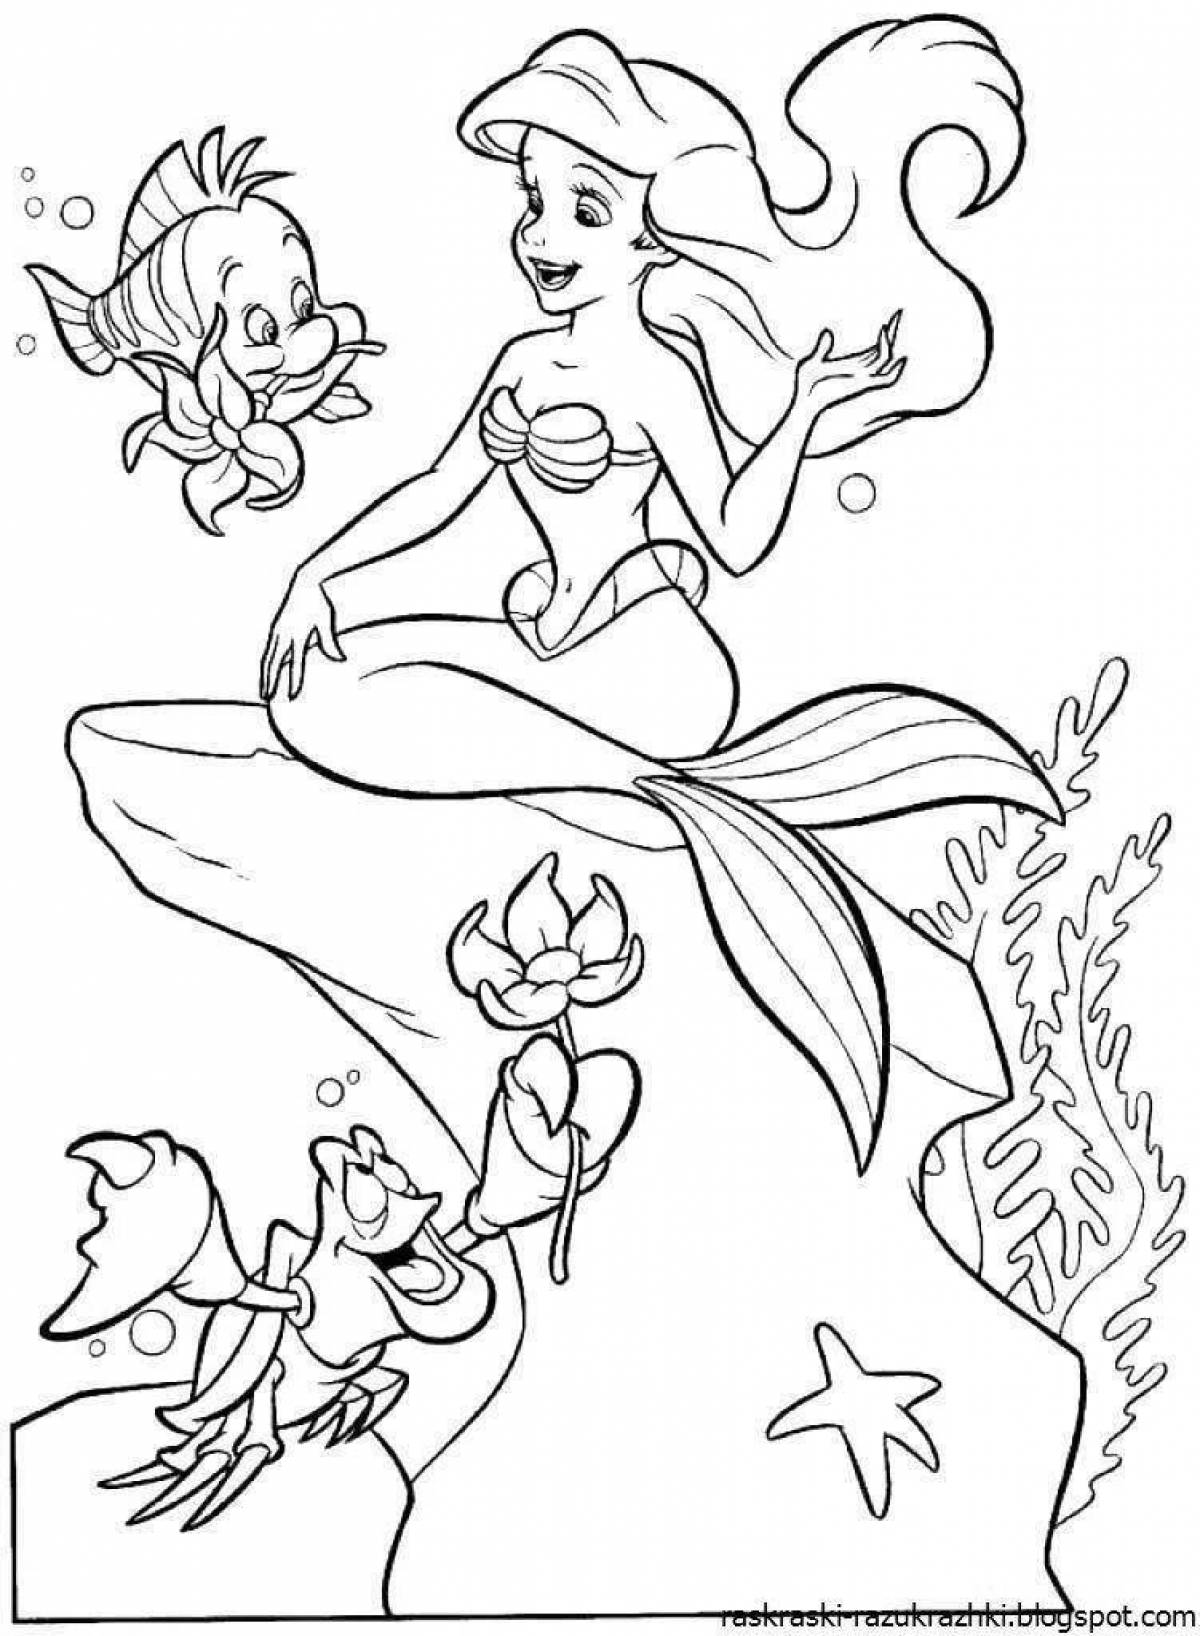 Bright coloring for girls little mermaid